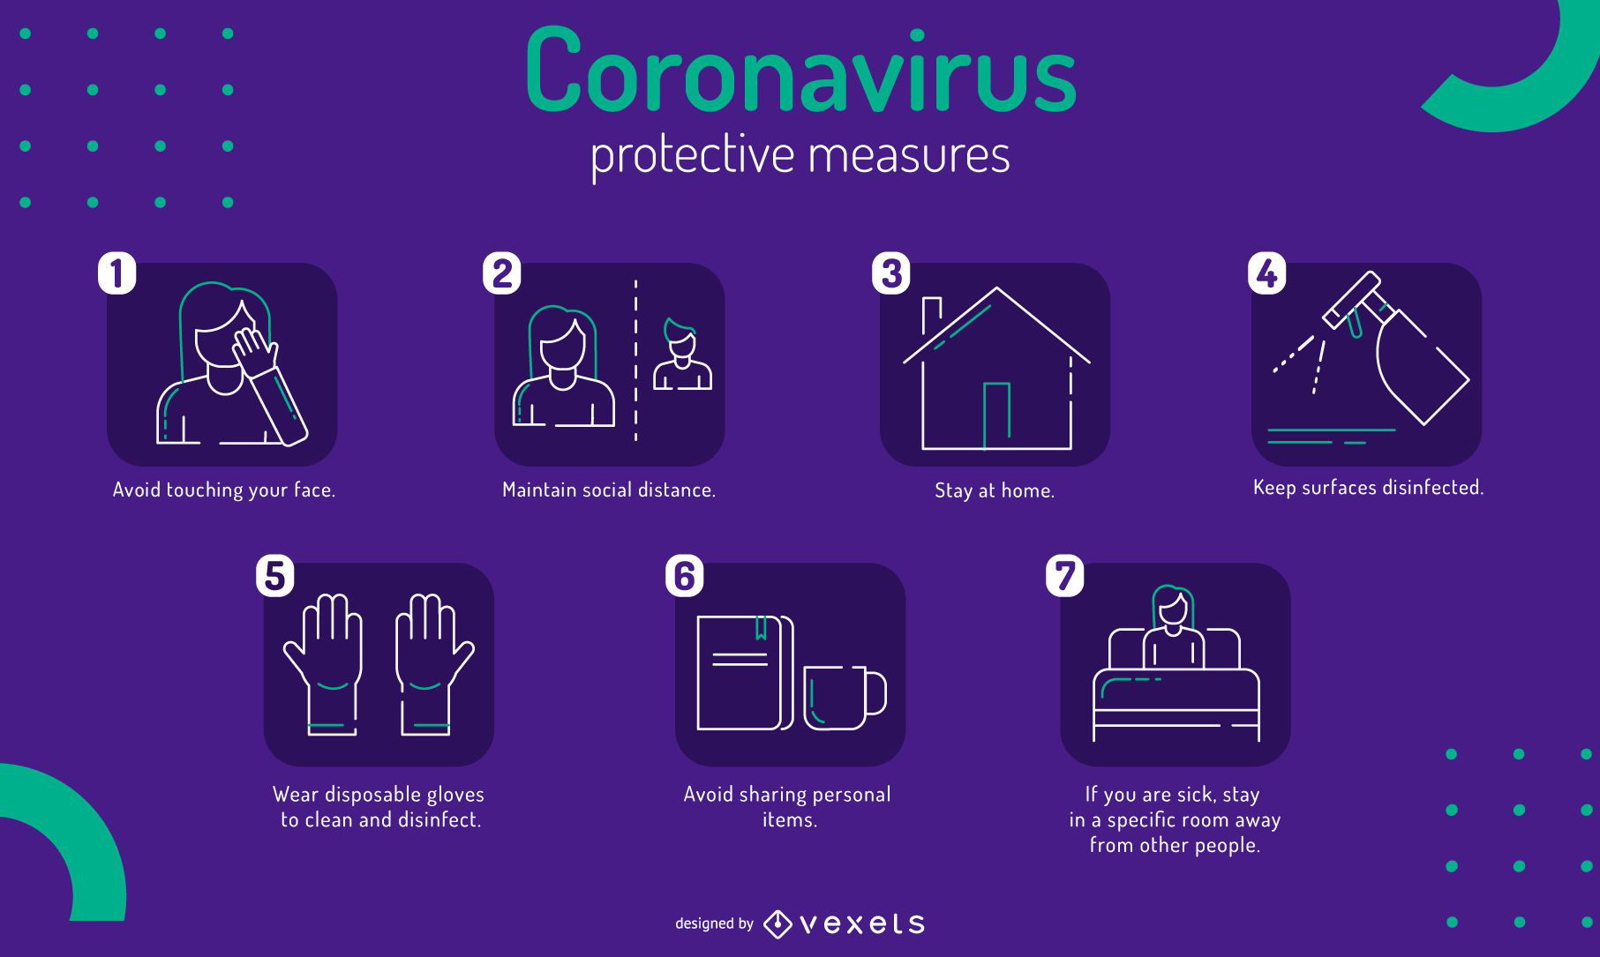 Covid-19 protective measures infographic template